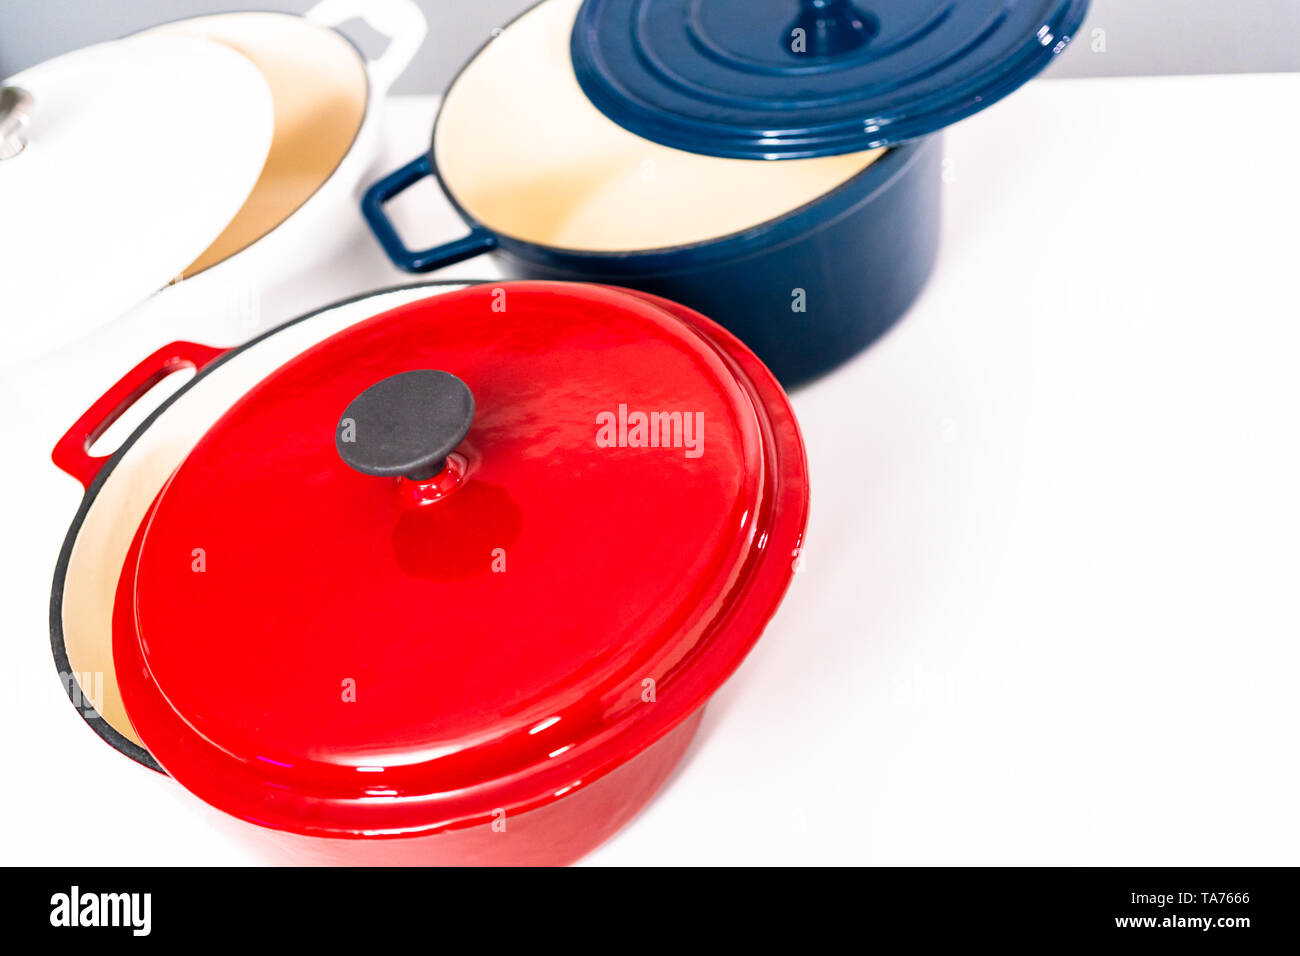 Red, white and blue enameled cast iron covered round dutch ovens on a whjite background. Stock Photo